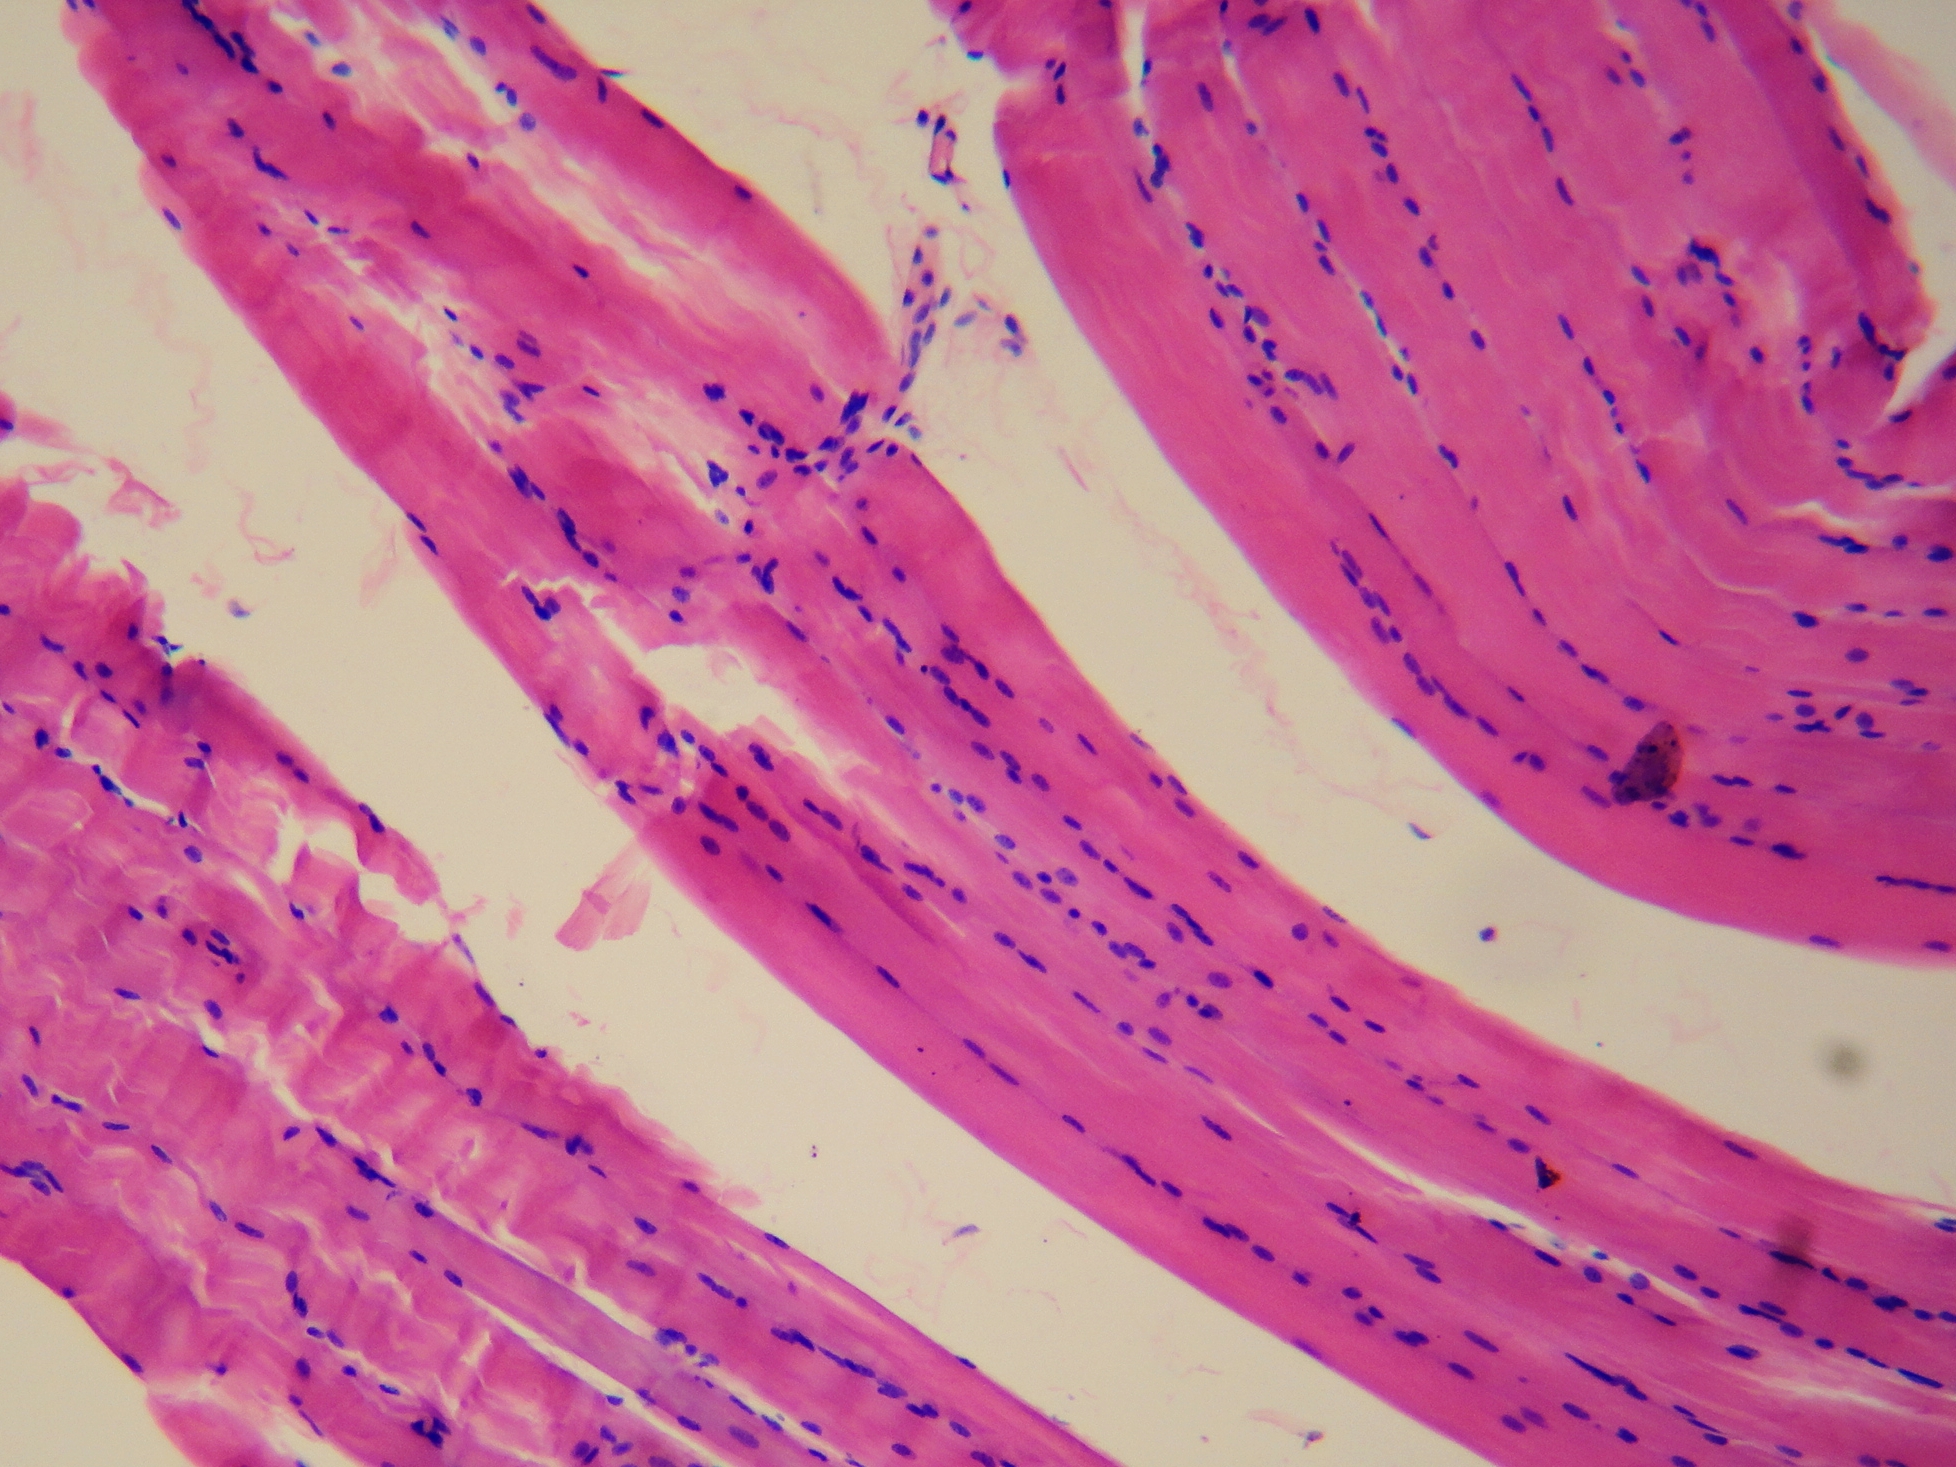 File:Smooth muscle tissue.jpg - Wikimedia Commons